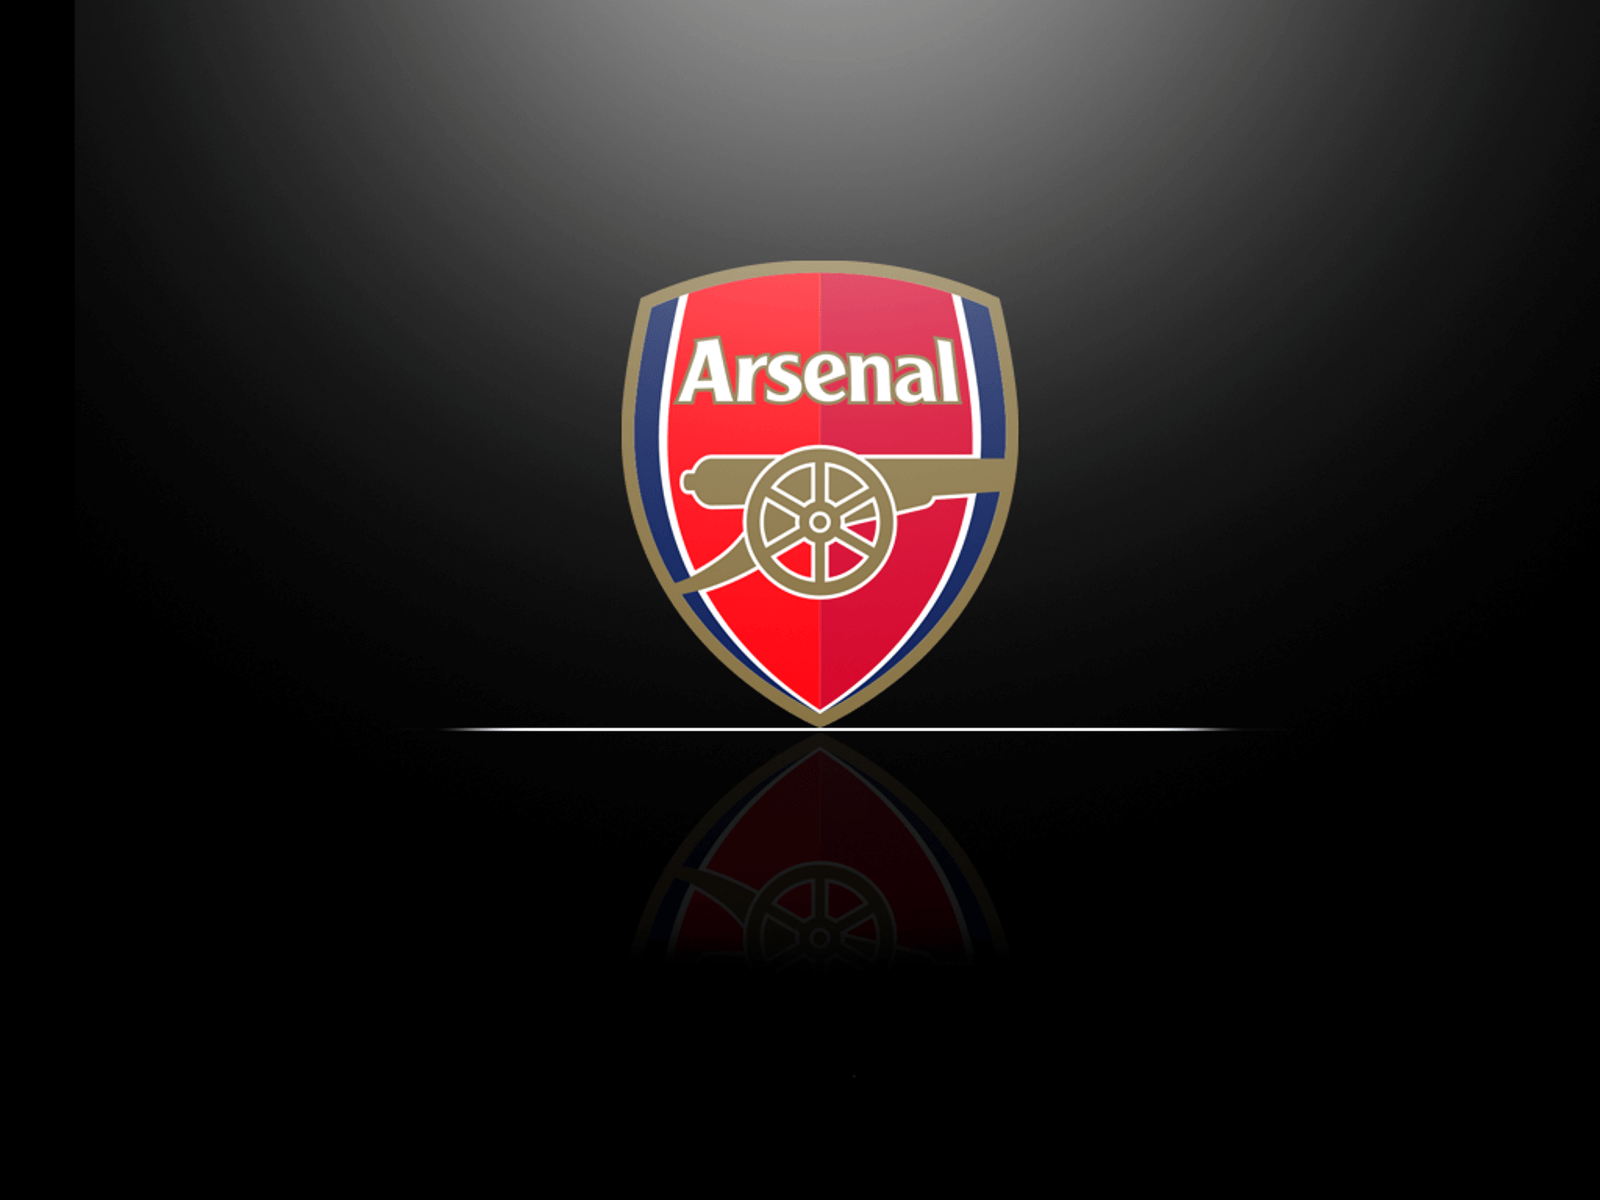 Arsenal FC Logo Wallpapers - Top Free Arsenal FC Logo Backgrounds ...